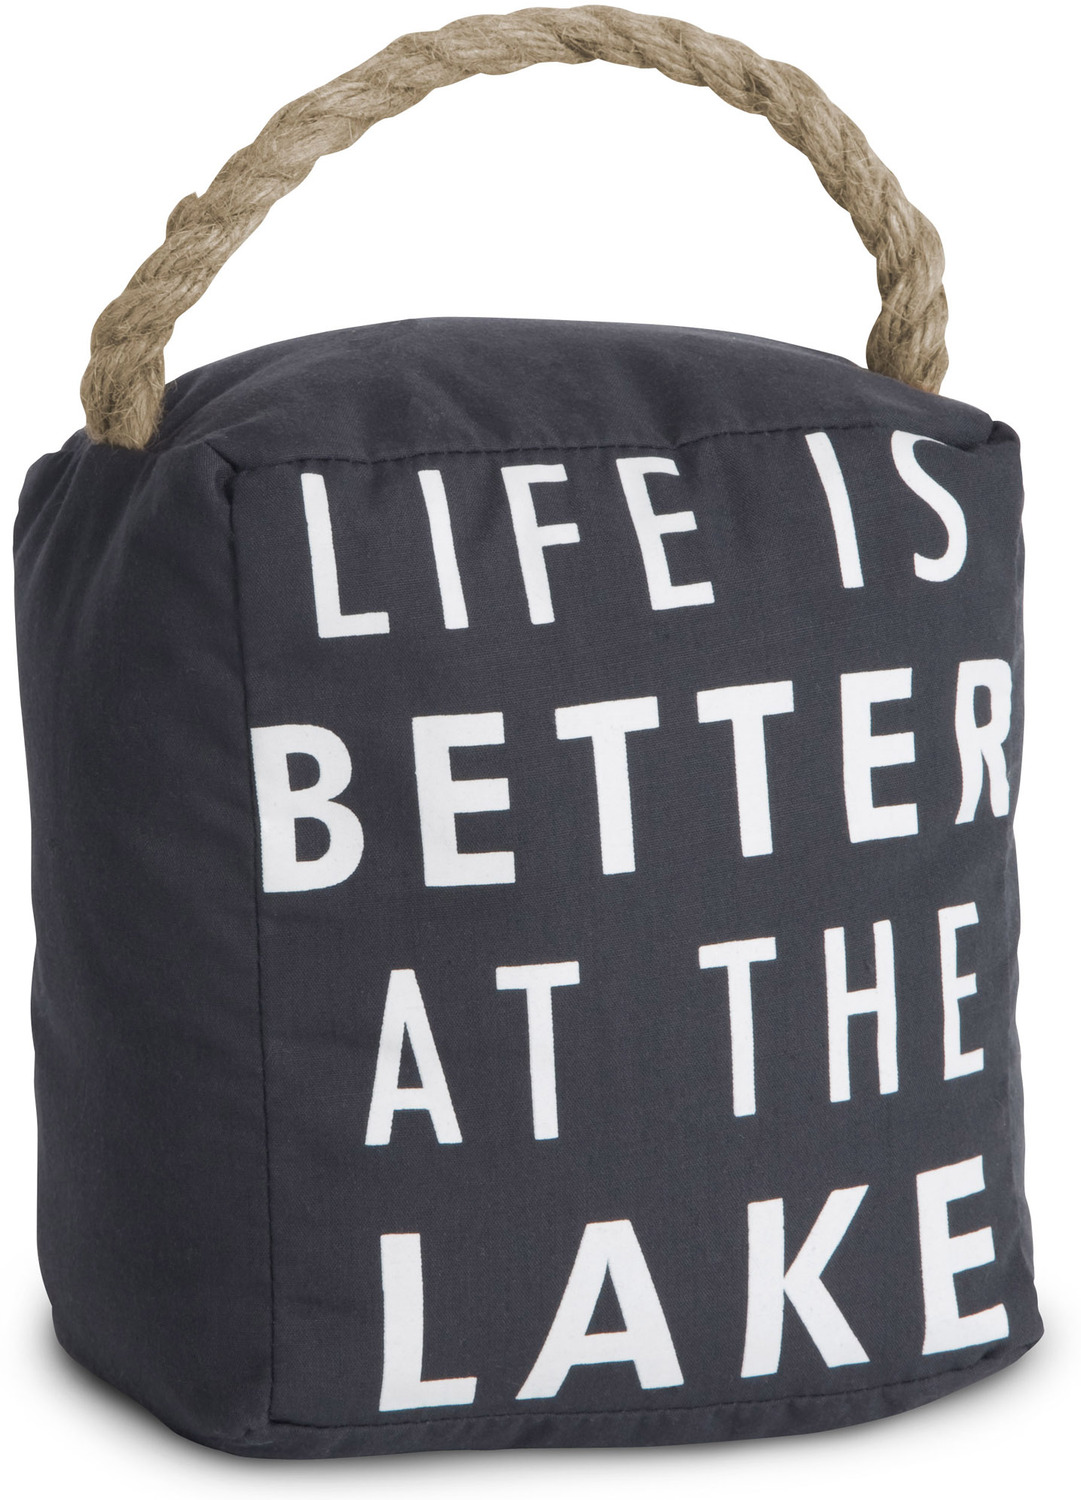 At the Lake by Open Door Decor - <em>Lake</em> - Simple & Functional Door Stopper -